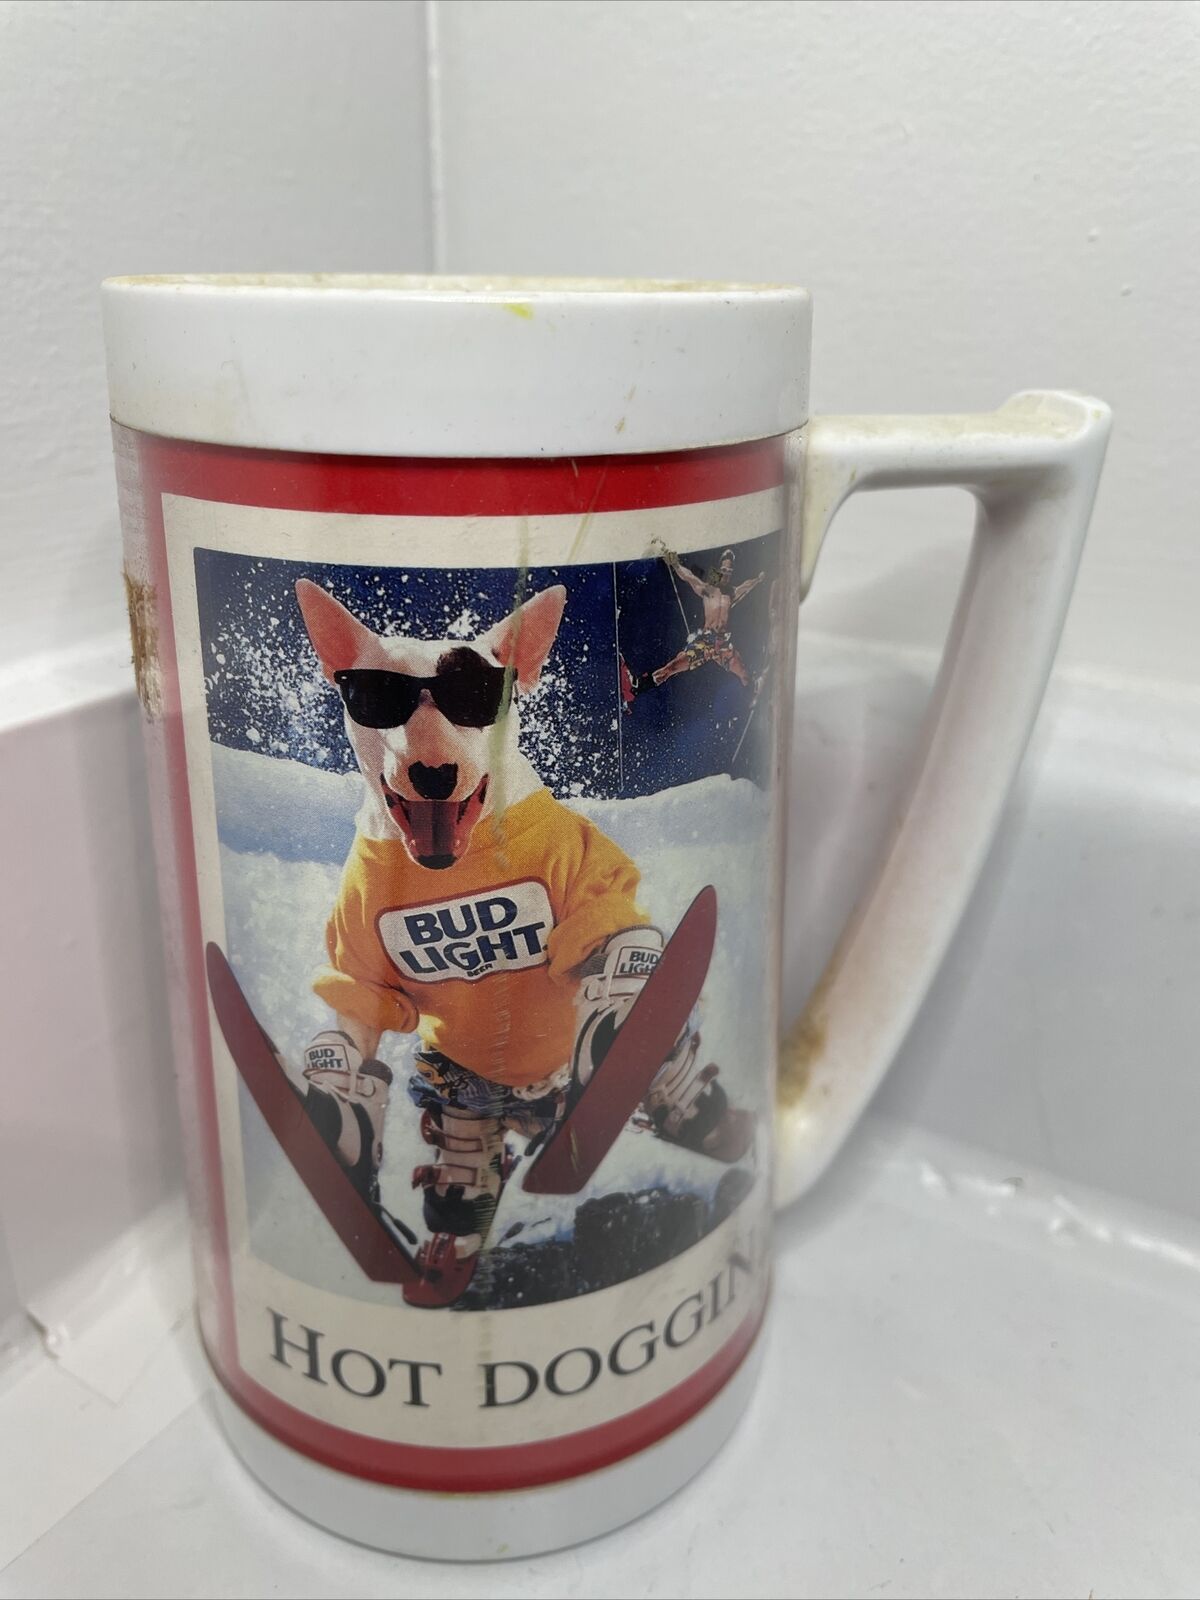 Bud Light Beer Spuds Mackenzie Thermo Serv Rock N Roll Party Hot Doggin Cup 1987